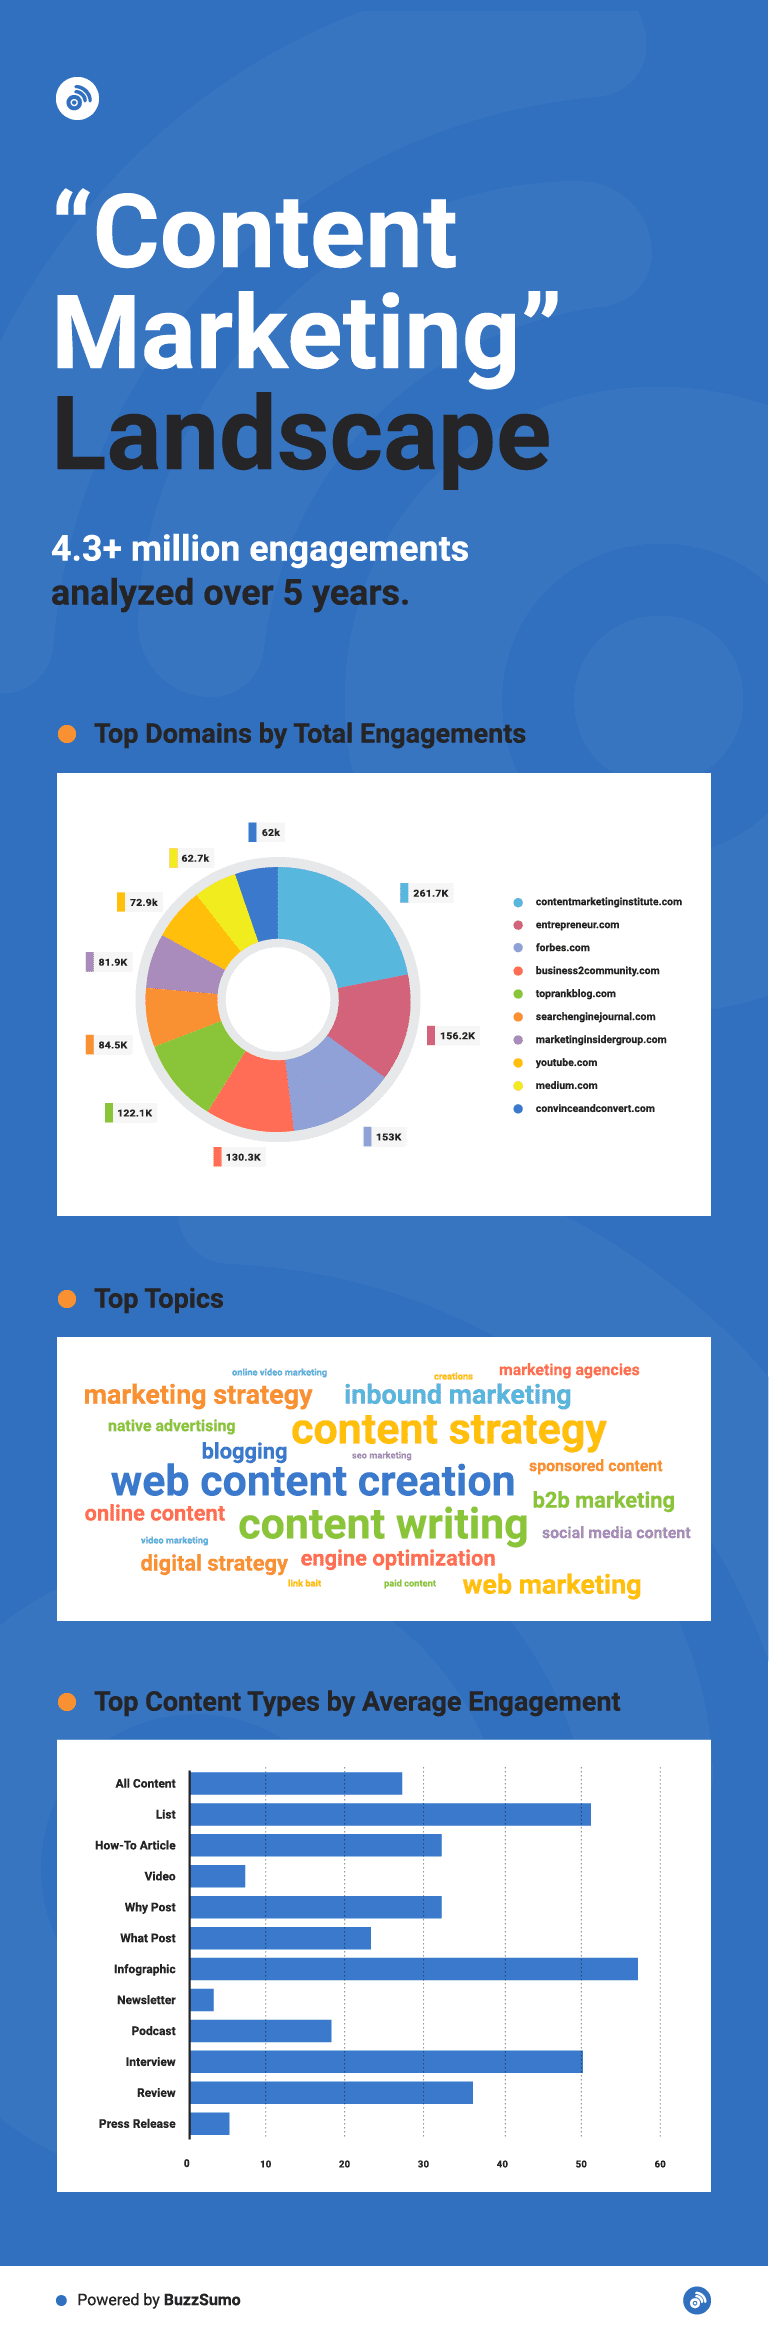 an infographic that shows data on content marketing, including the top topics and top content types by average engagement